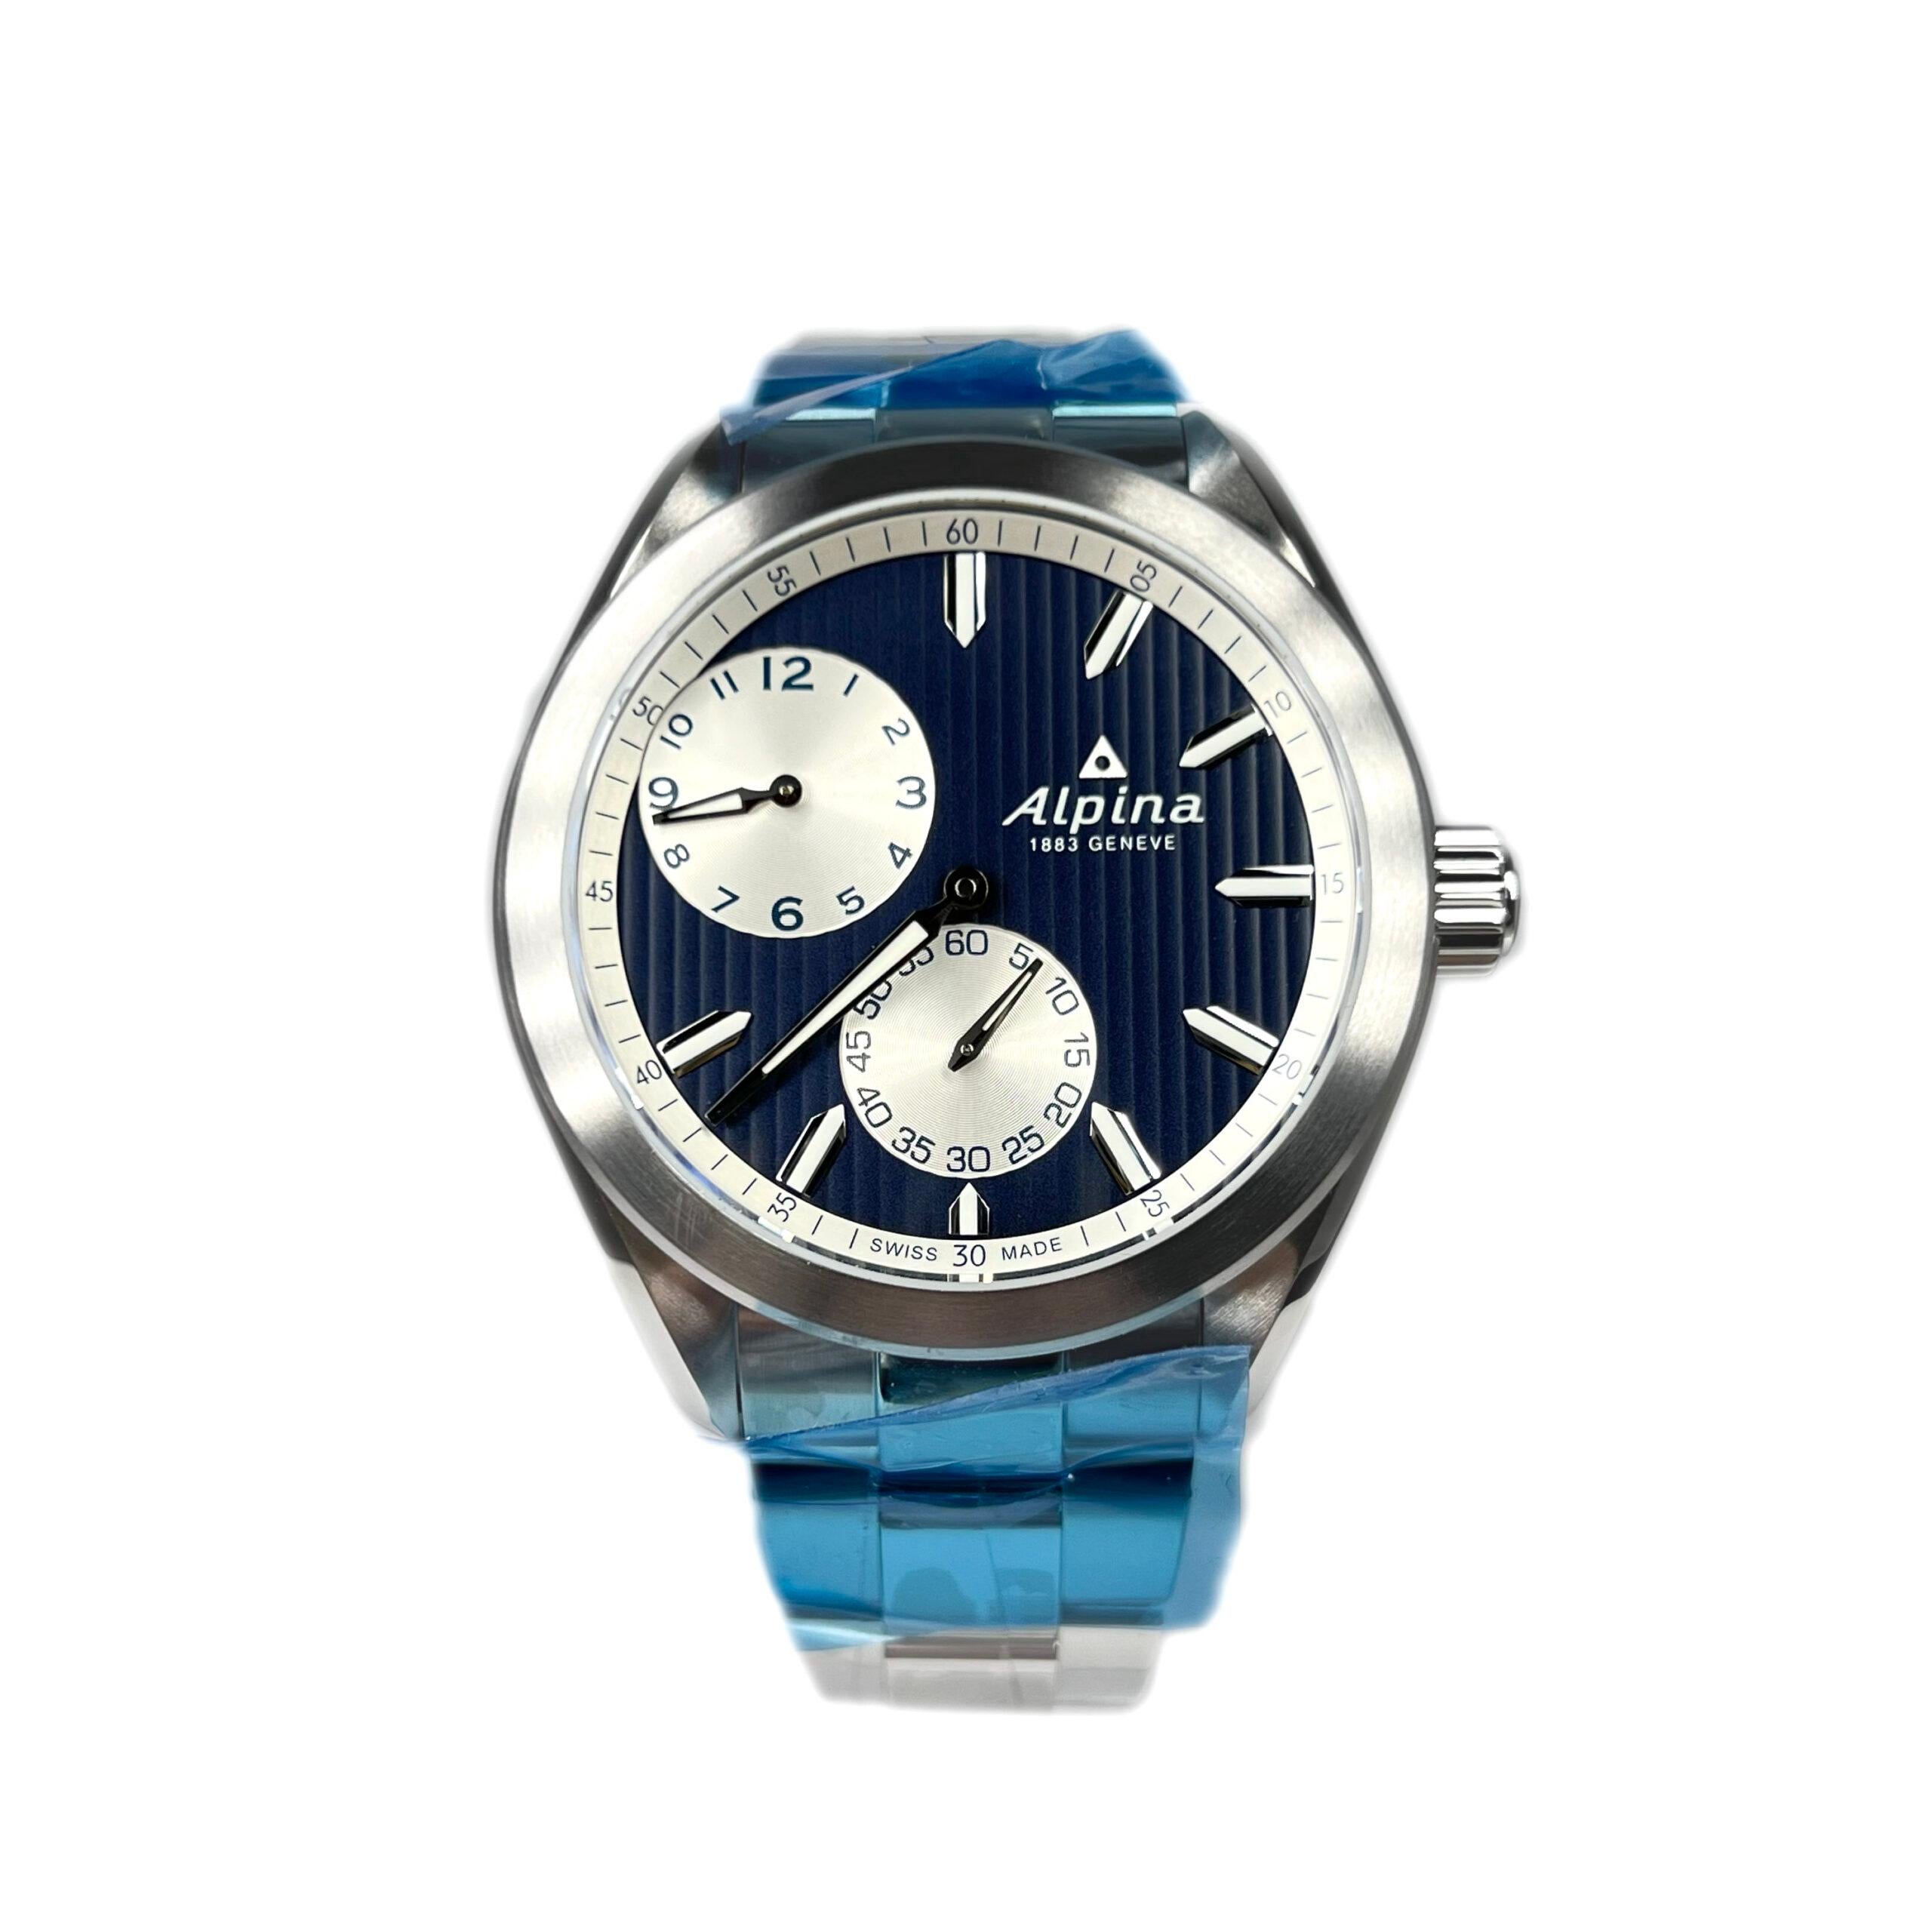 This Men’s Watch has a 45 mm silver-tone stainless steel case with a stainless steel strap. Fixed silver-tone stainless steel bezel. Dark blue dial with silver-tone hands and index hour markers. Arabic numeral minute markers (at 5 minute intervals).